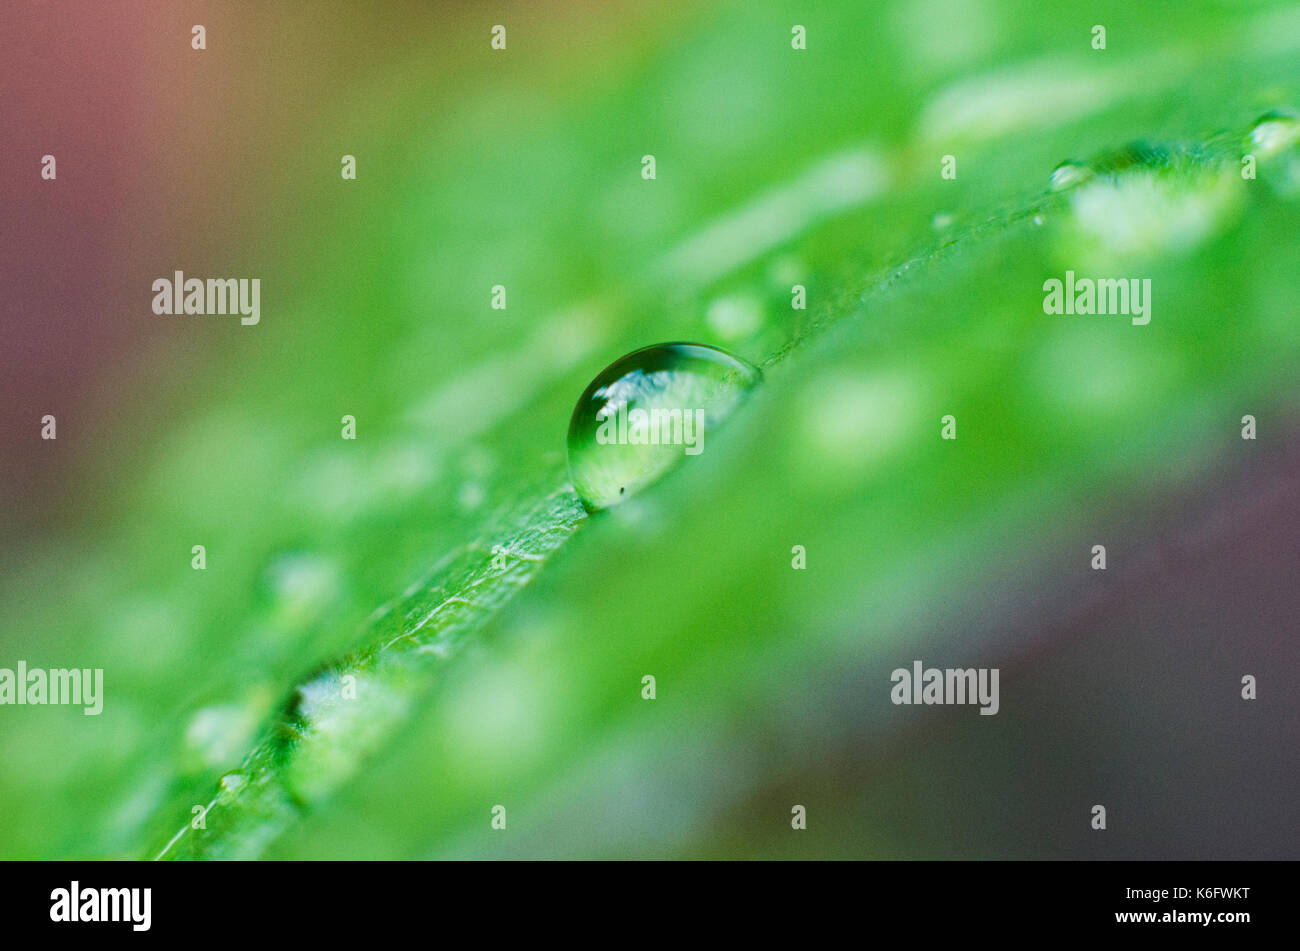 Macro photo of the droplet of water on the leaf Stock Photo